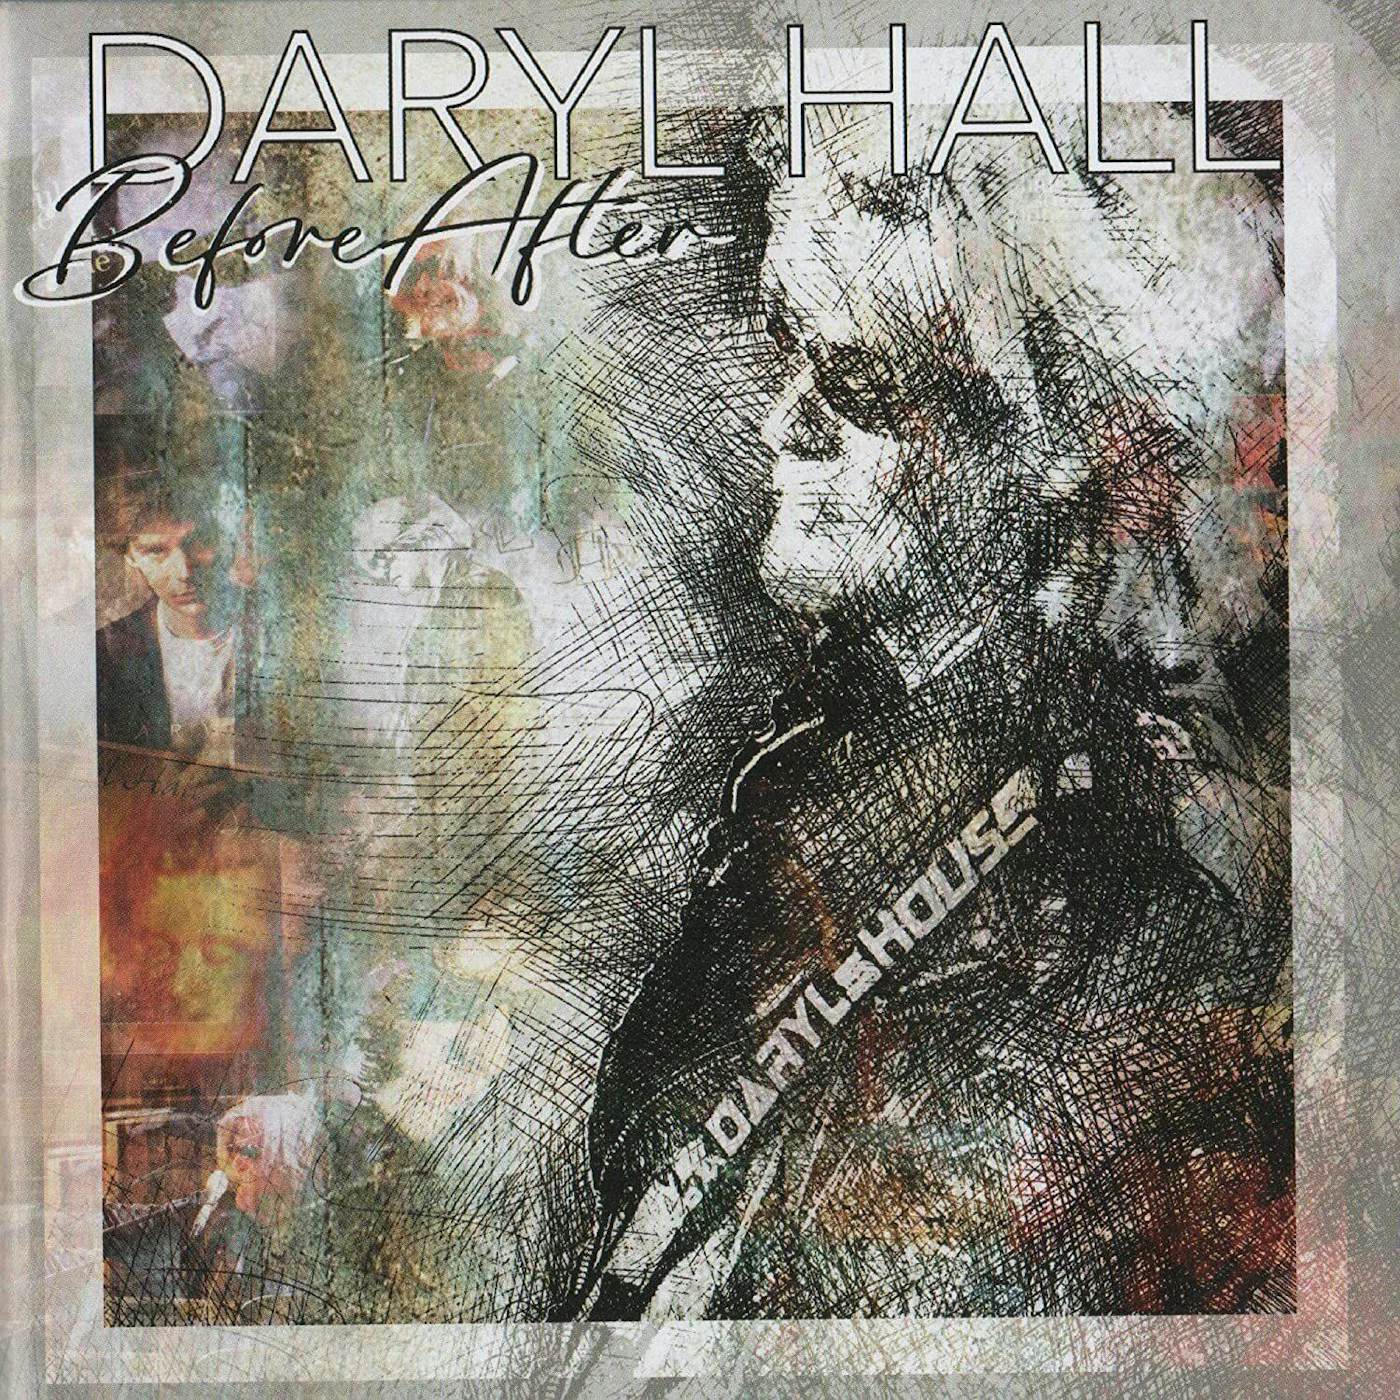 Daryl Hall Beforeafter (White Vinyl Record/Limited/3lp/Boxset)